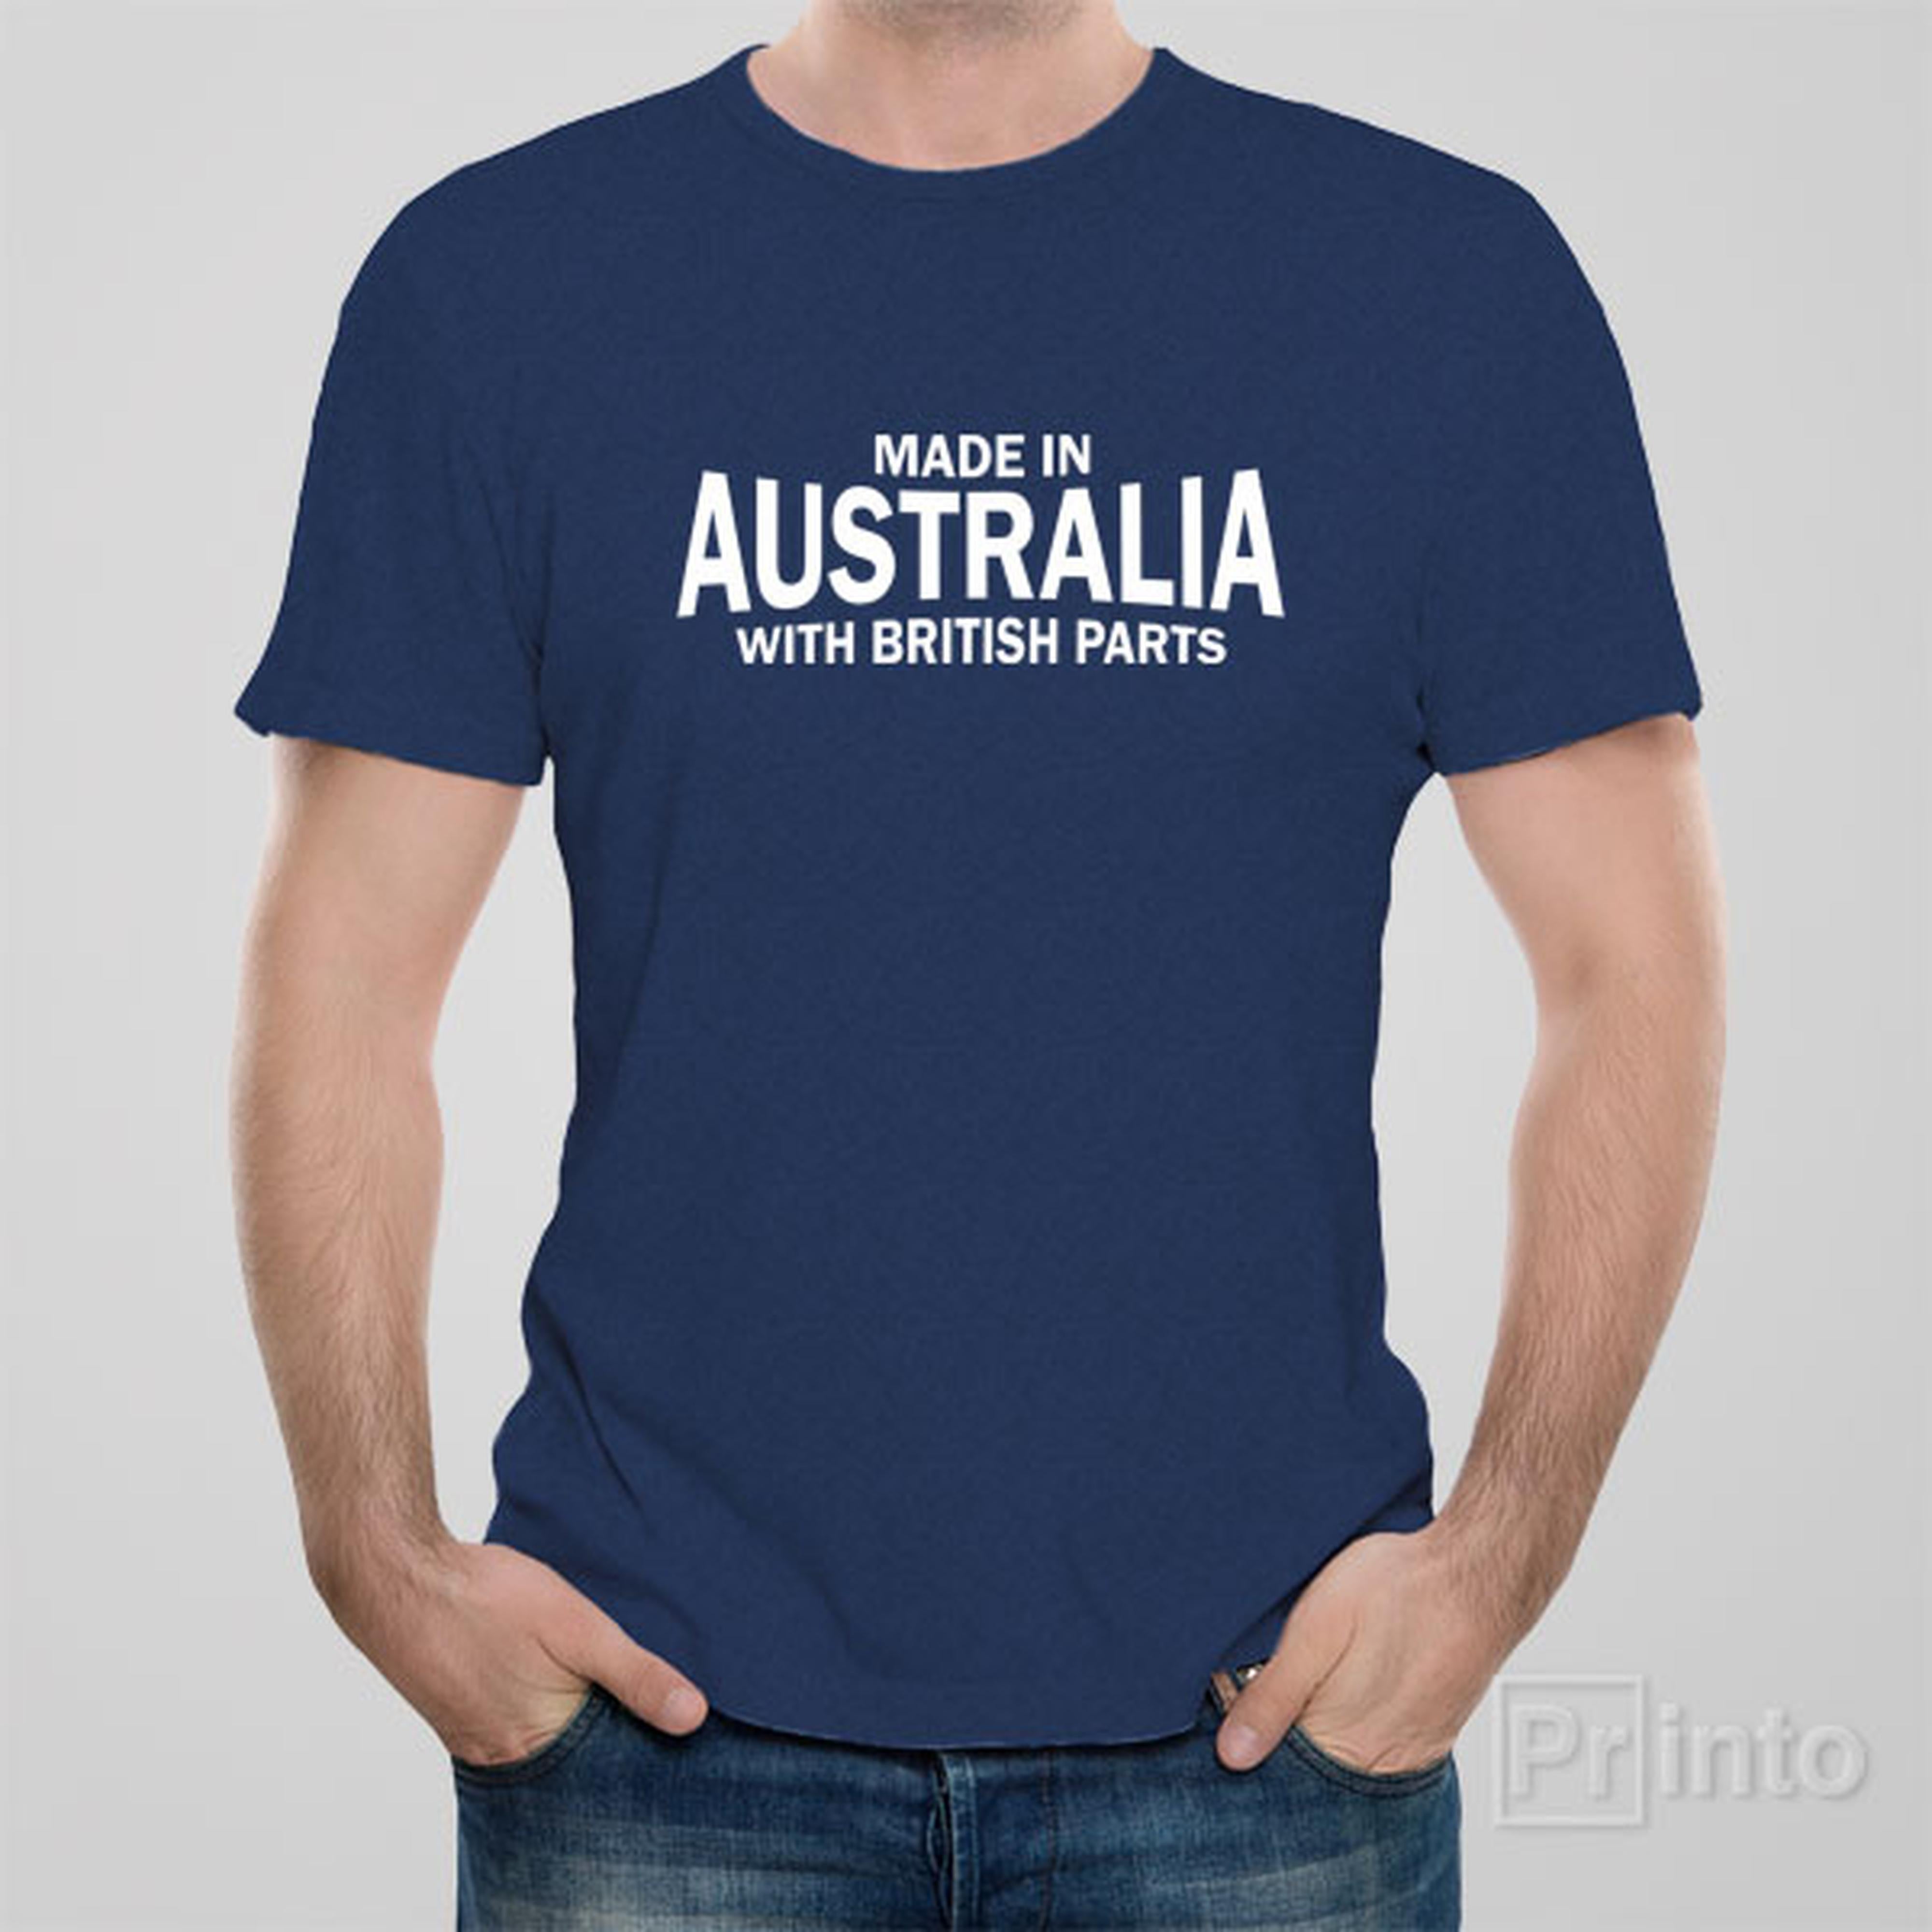 made-in-australia-with-british-parts-t-shirt